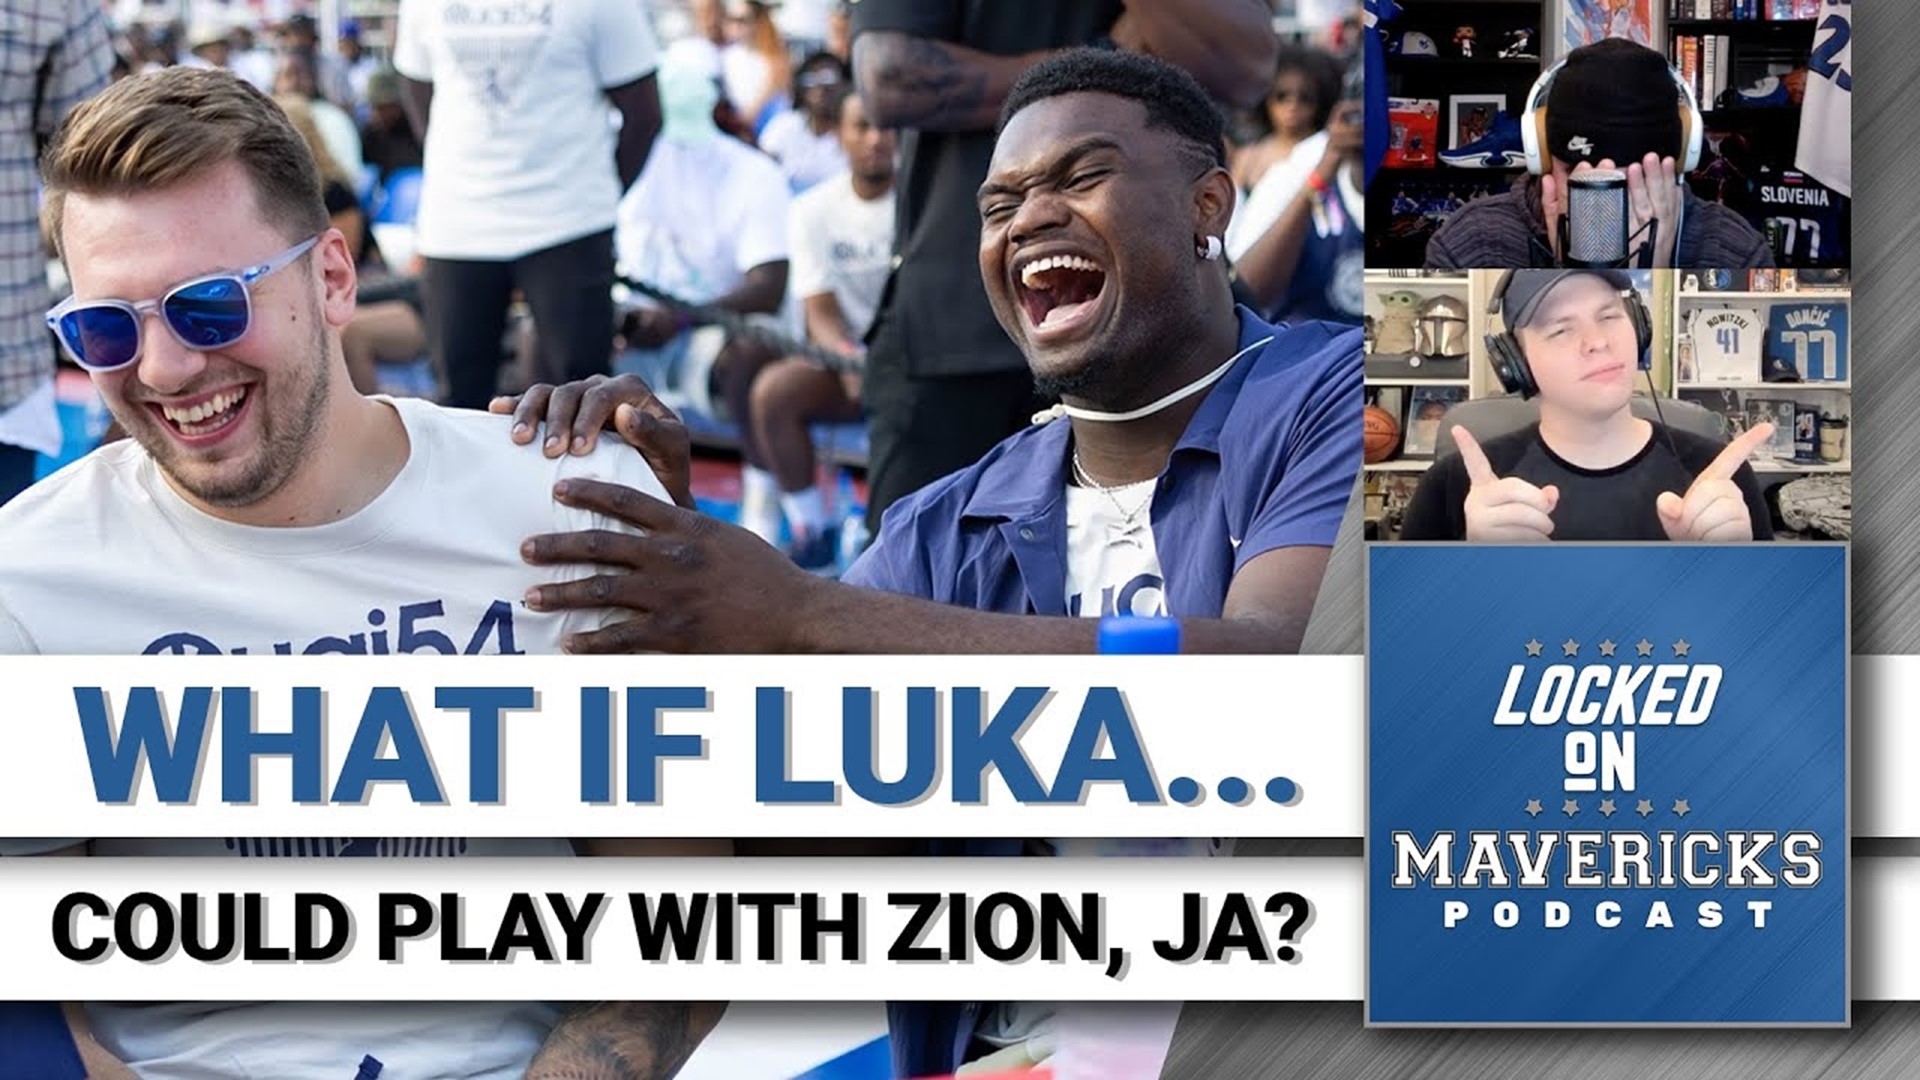 The Dallas Mavericks came within 1 tiebreaking ping-pong ball from pairing Luka Doncic with Zion Williamson or Ja Morant.